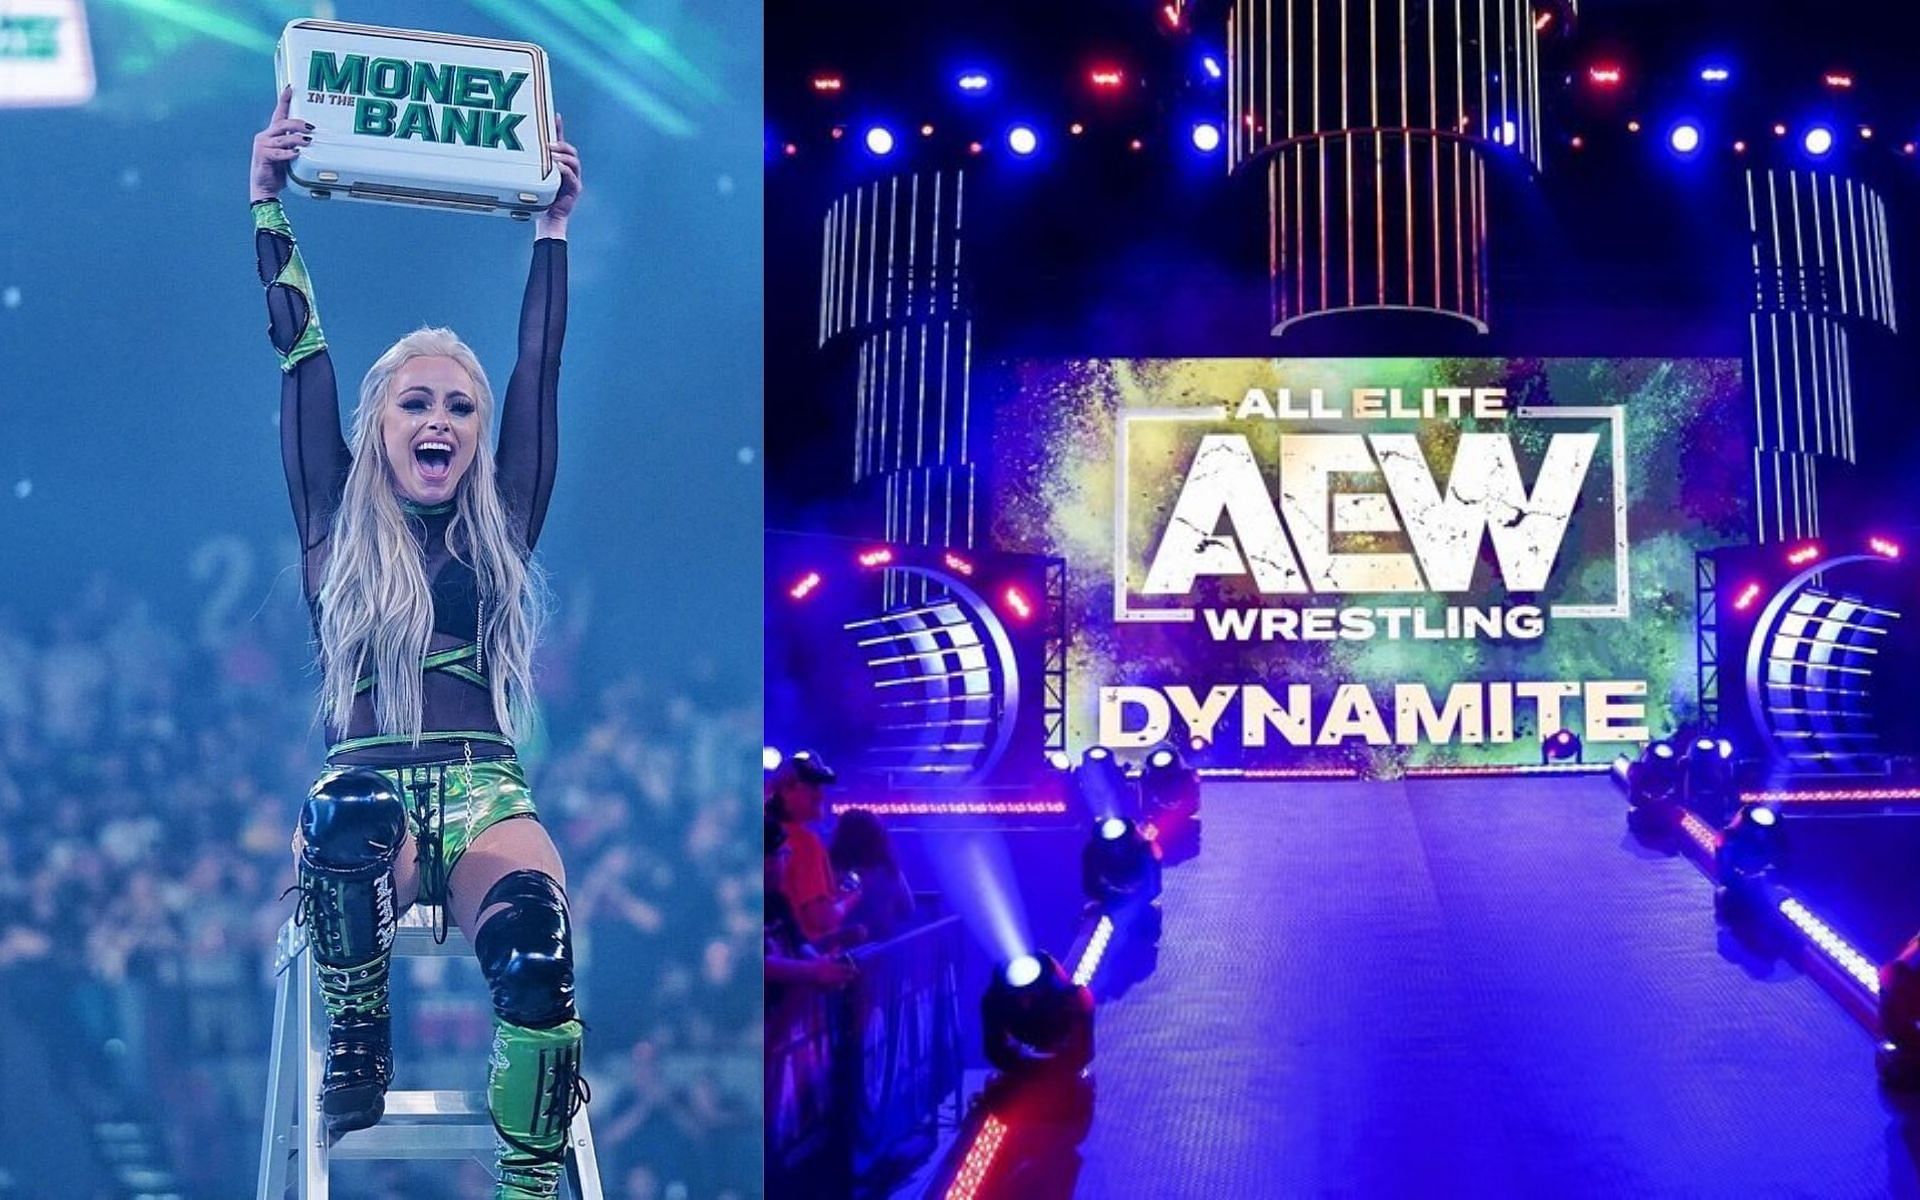 Liv Morgan with the WWE Money in the Bank briefcase (left) and AEW entrance (right).